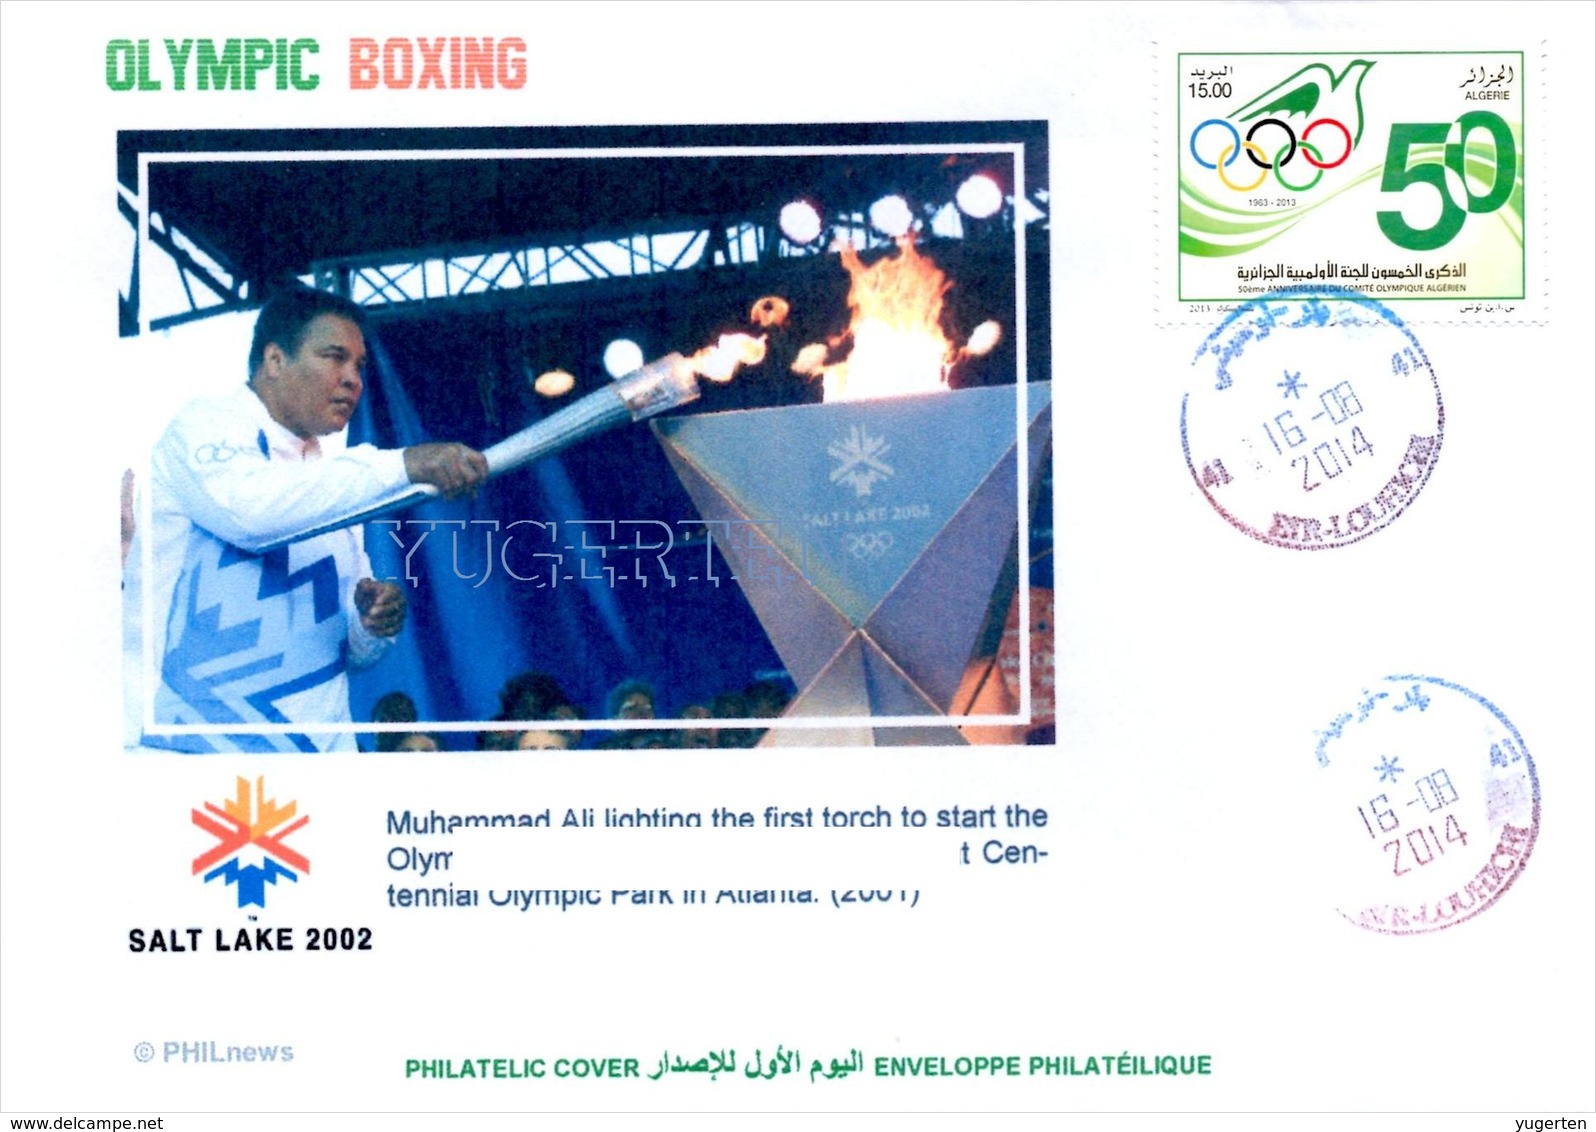 ARGELIA 2016 Philatelic Cover Olympics Muhammad Ali Boxeo Boxing Boxe Cassus Clay Olympic - Hiver 2002: Salt Lake City - Paralympic